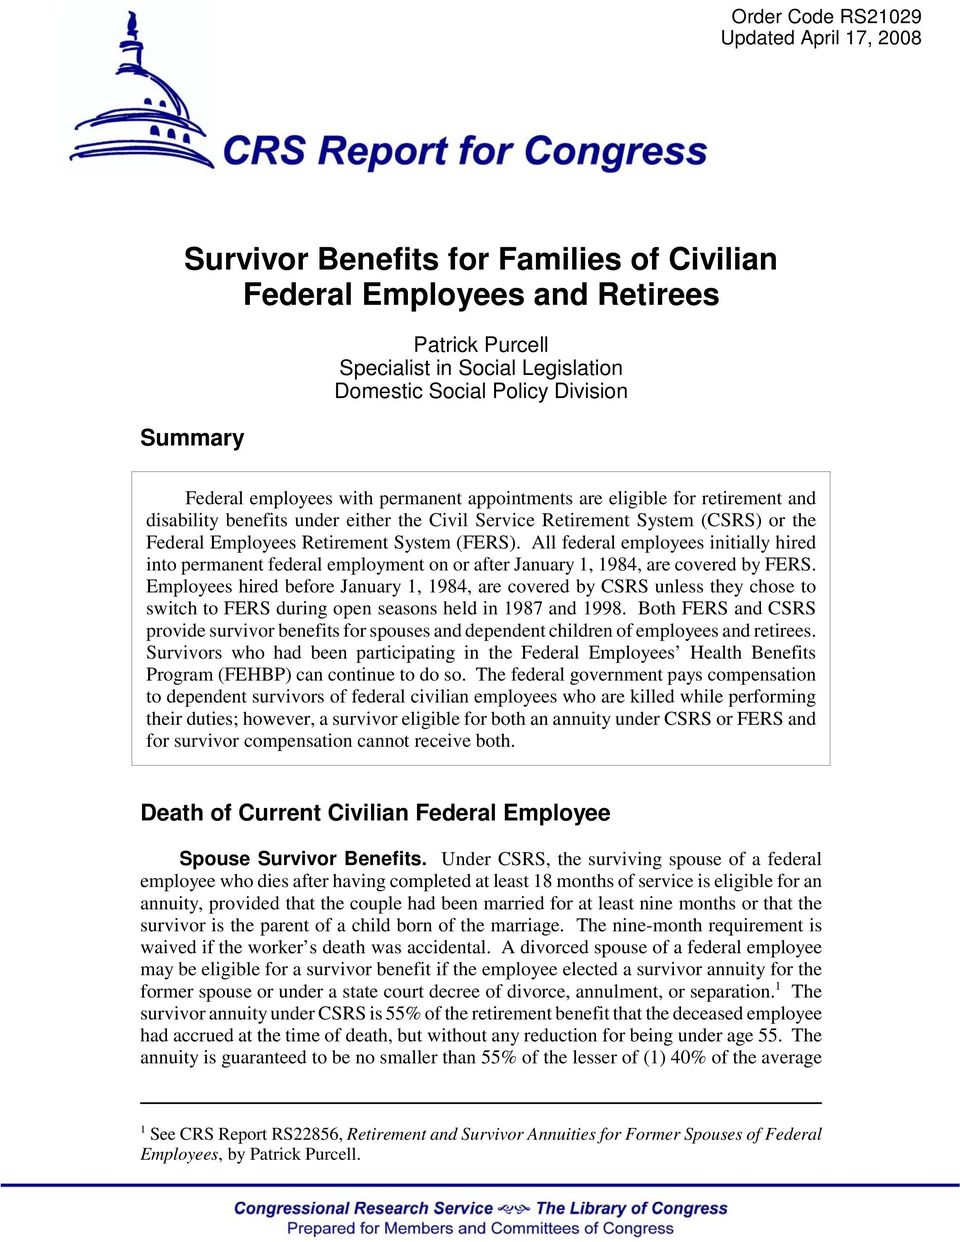 System (FERS). All federal employees initially hired into permanent federal employment on or after January 1, 1984, are covered by FERS.